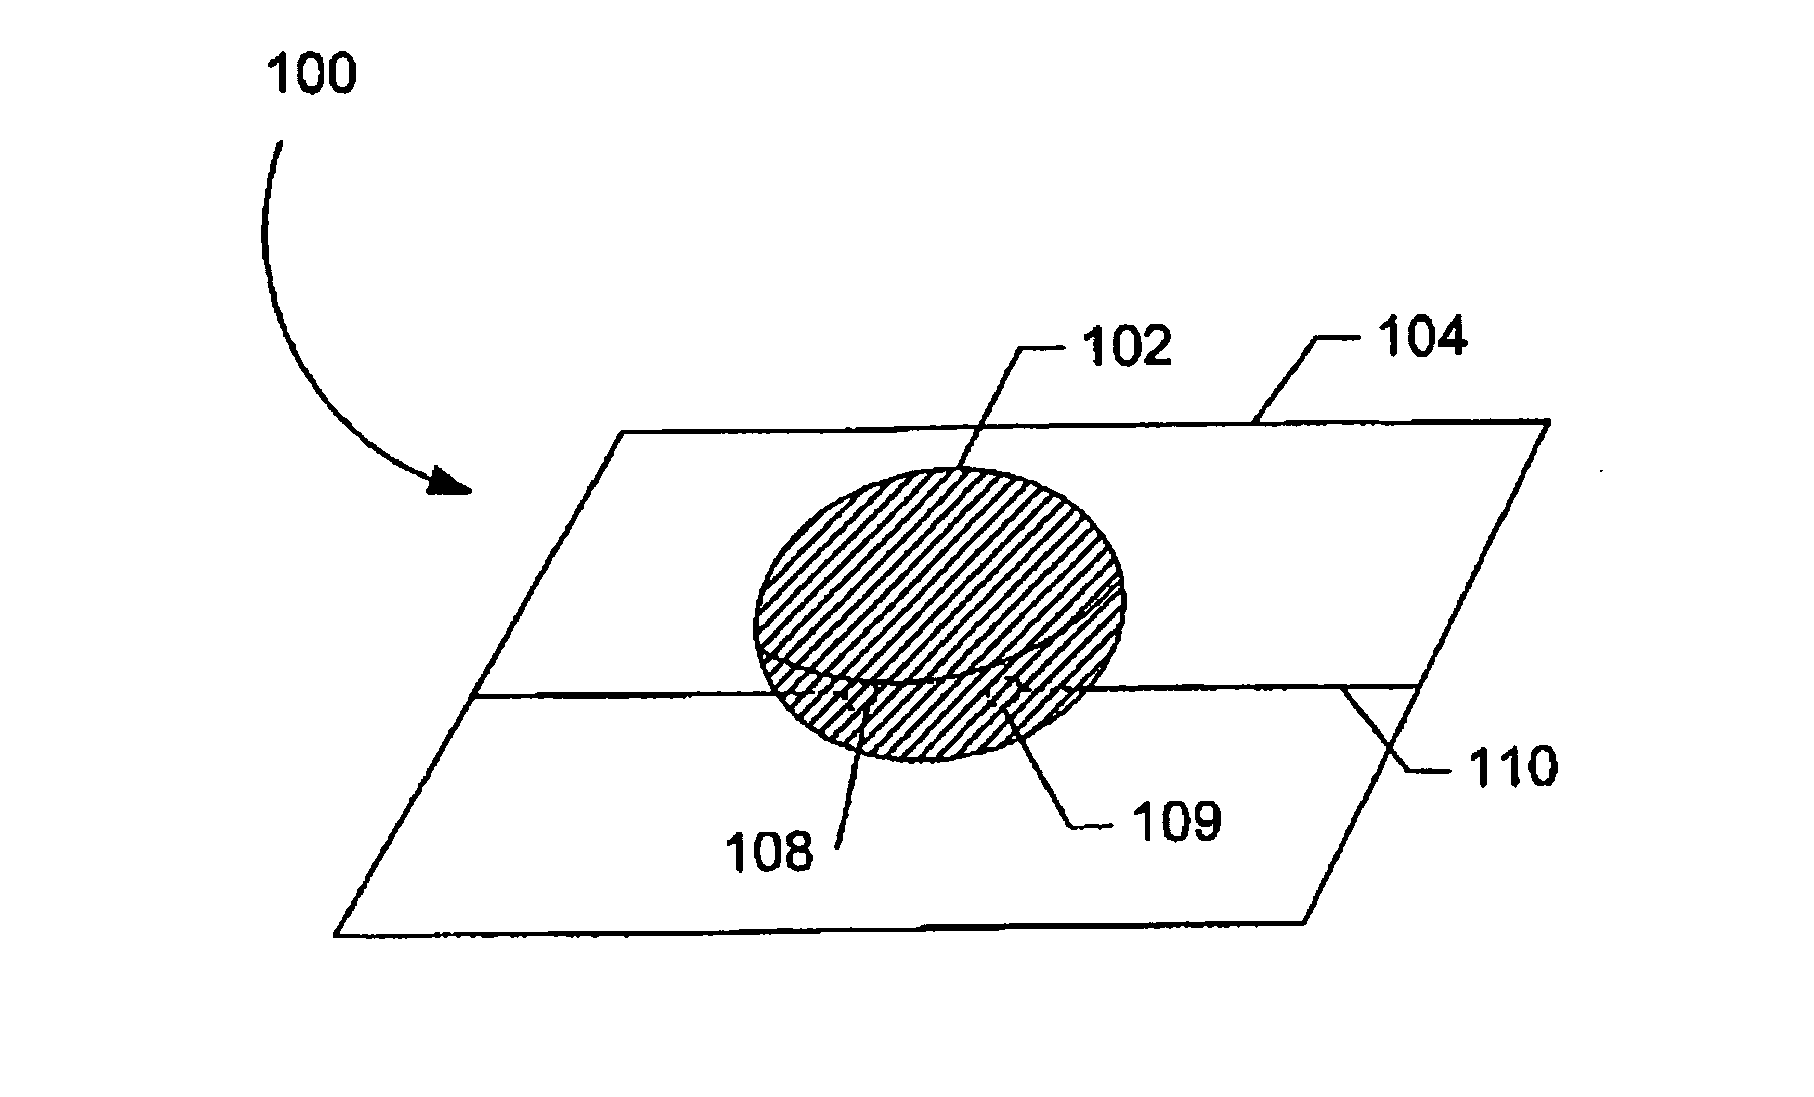 Systems and methods for collecting tear film and measuring tear film osmolarity